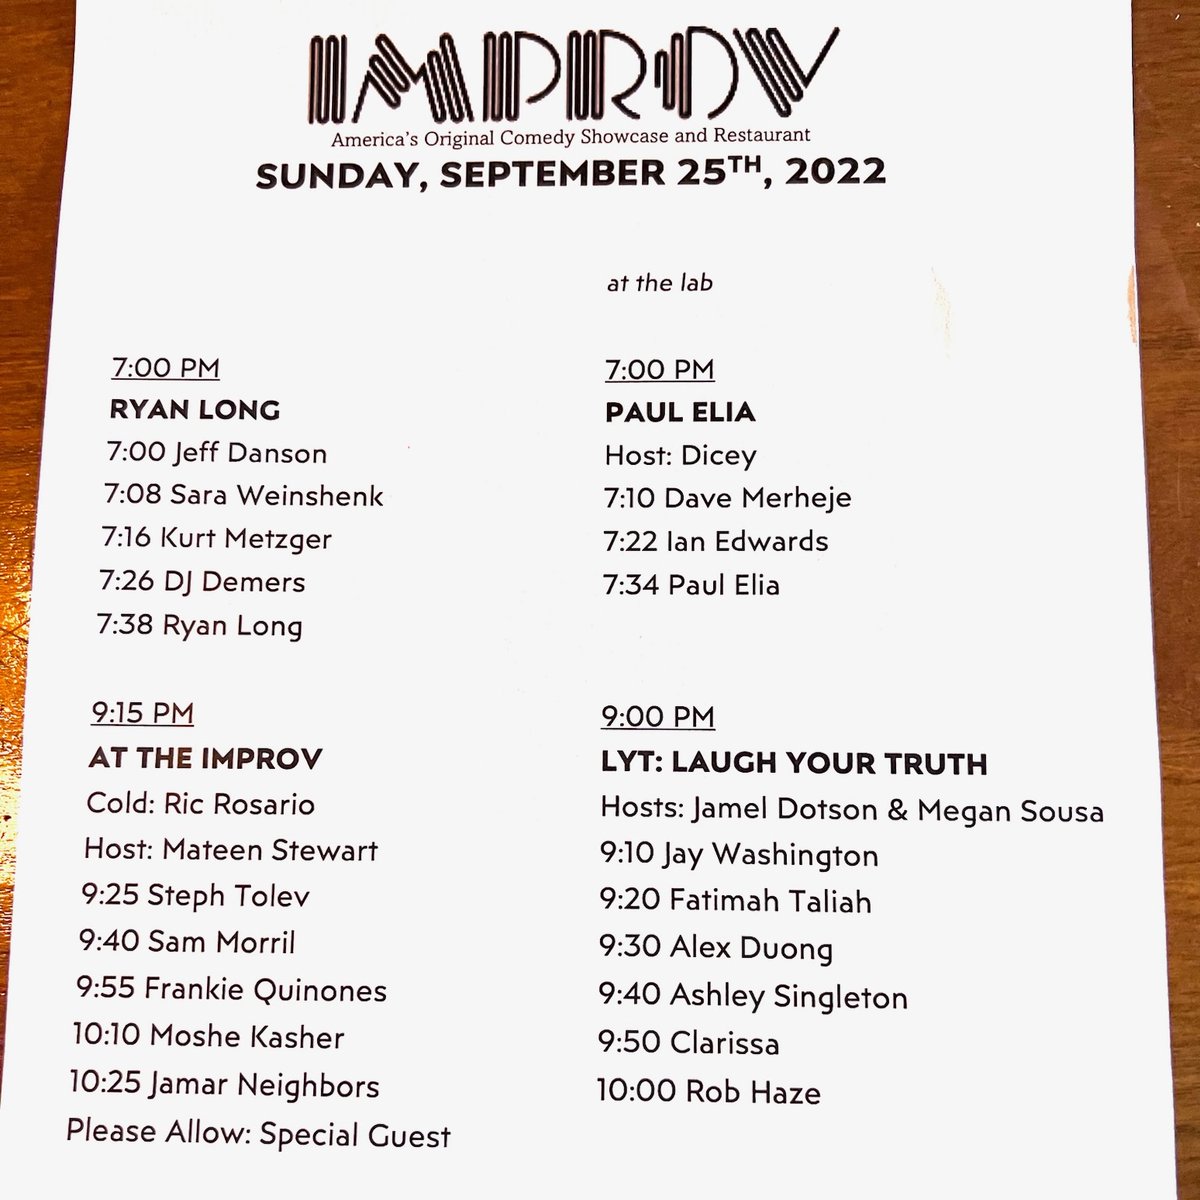 Set times tonight! @ryanlongcomedy is SOLD OUT! Get the last tickets for @PaulElia the late Main Room and @LYTcomedy at hollywoodimprov.com or arrive early and buy at the door! #hollywoodimprov #comedy